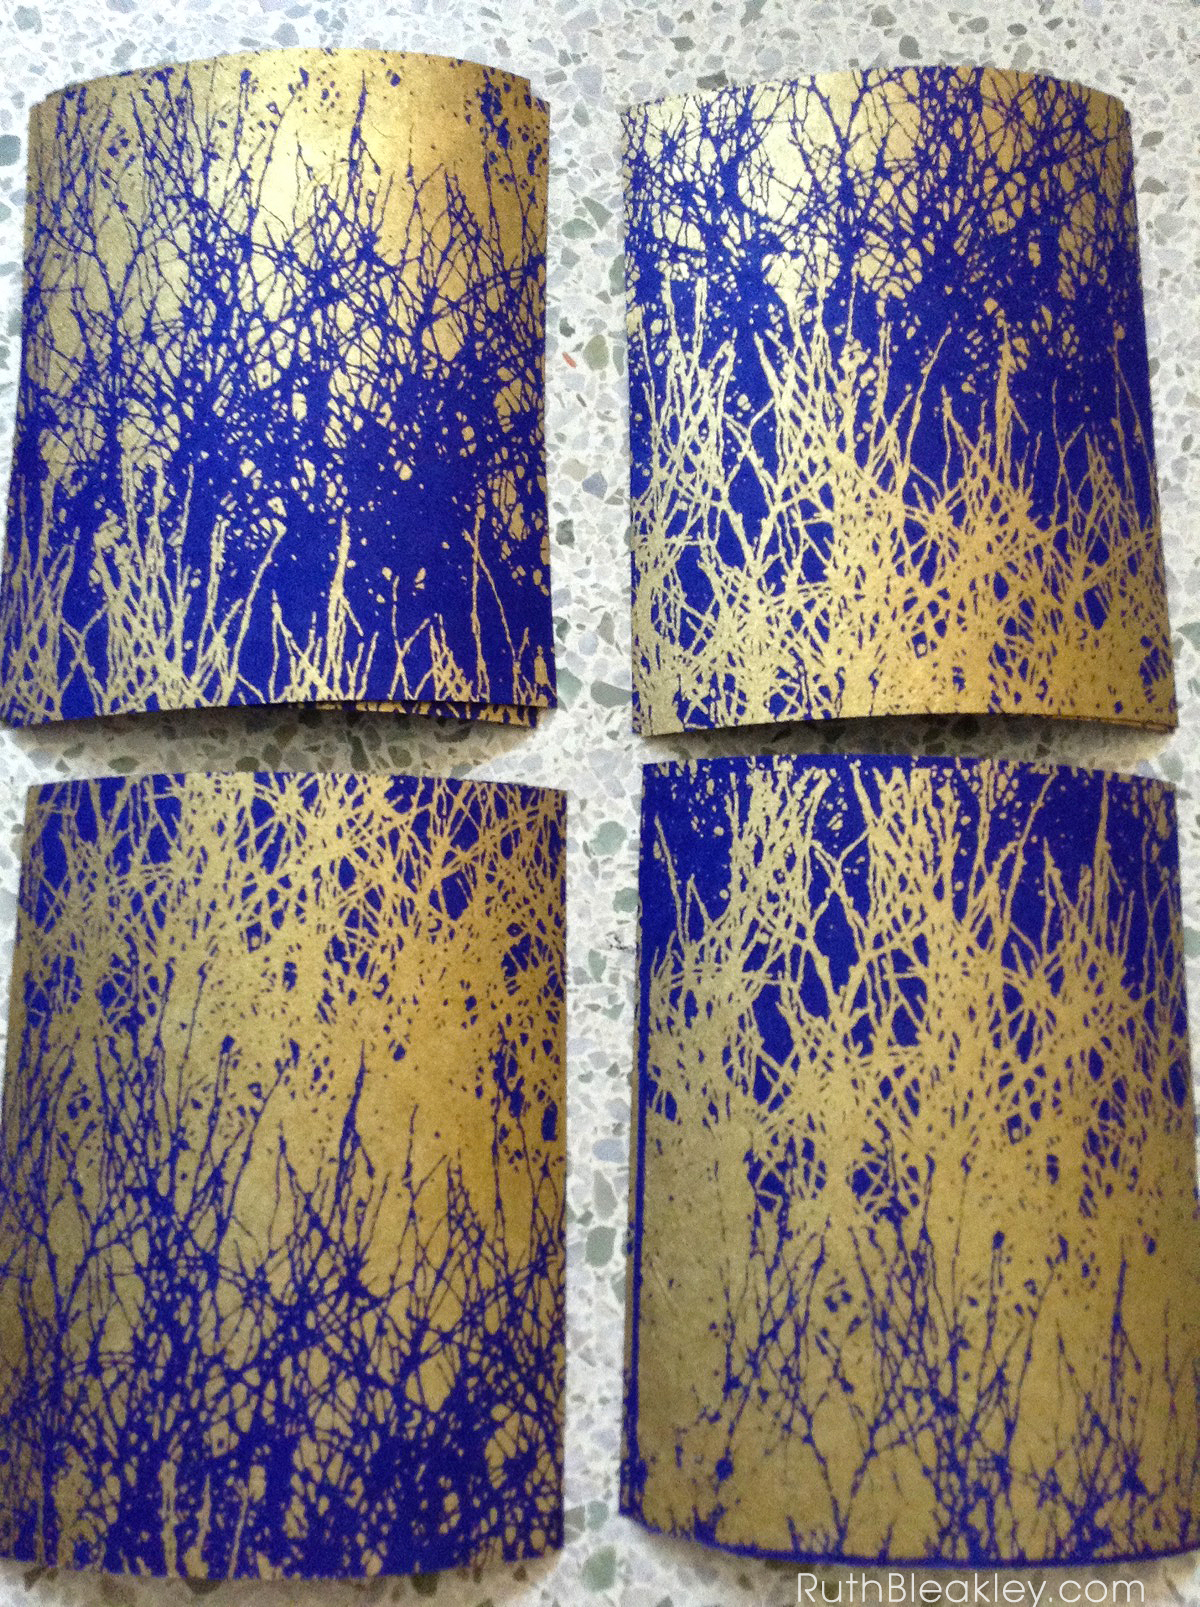 Gold and Indigo Branches - French Link Journals made by Florida book artist Ruth Bleakley - 7